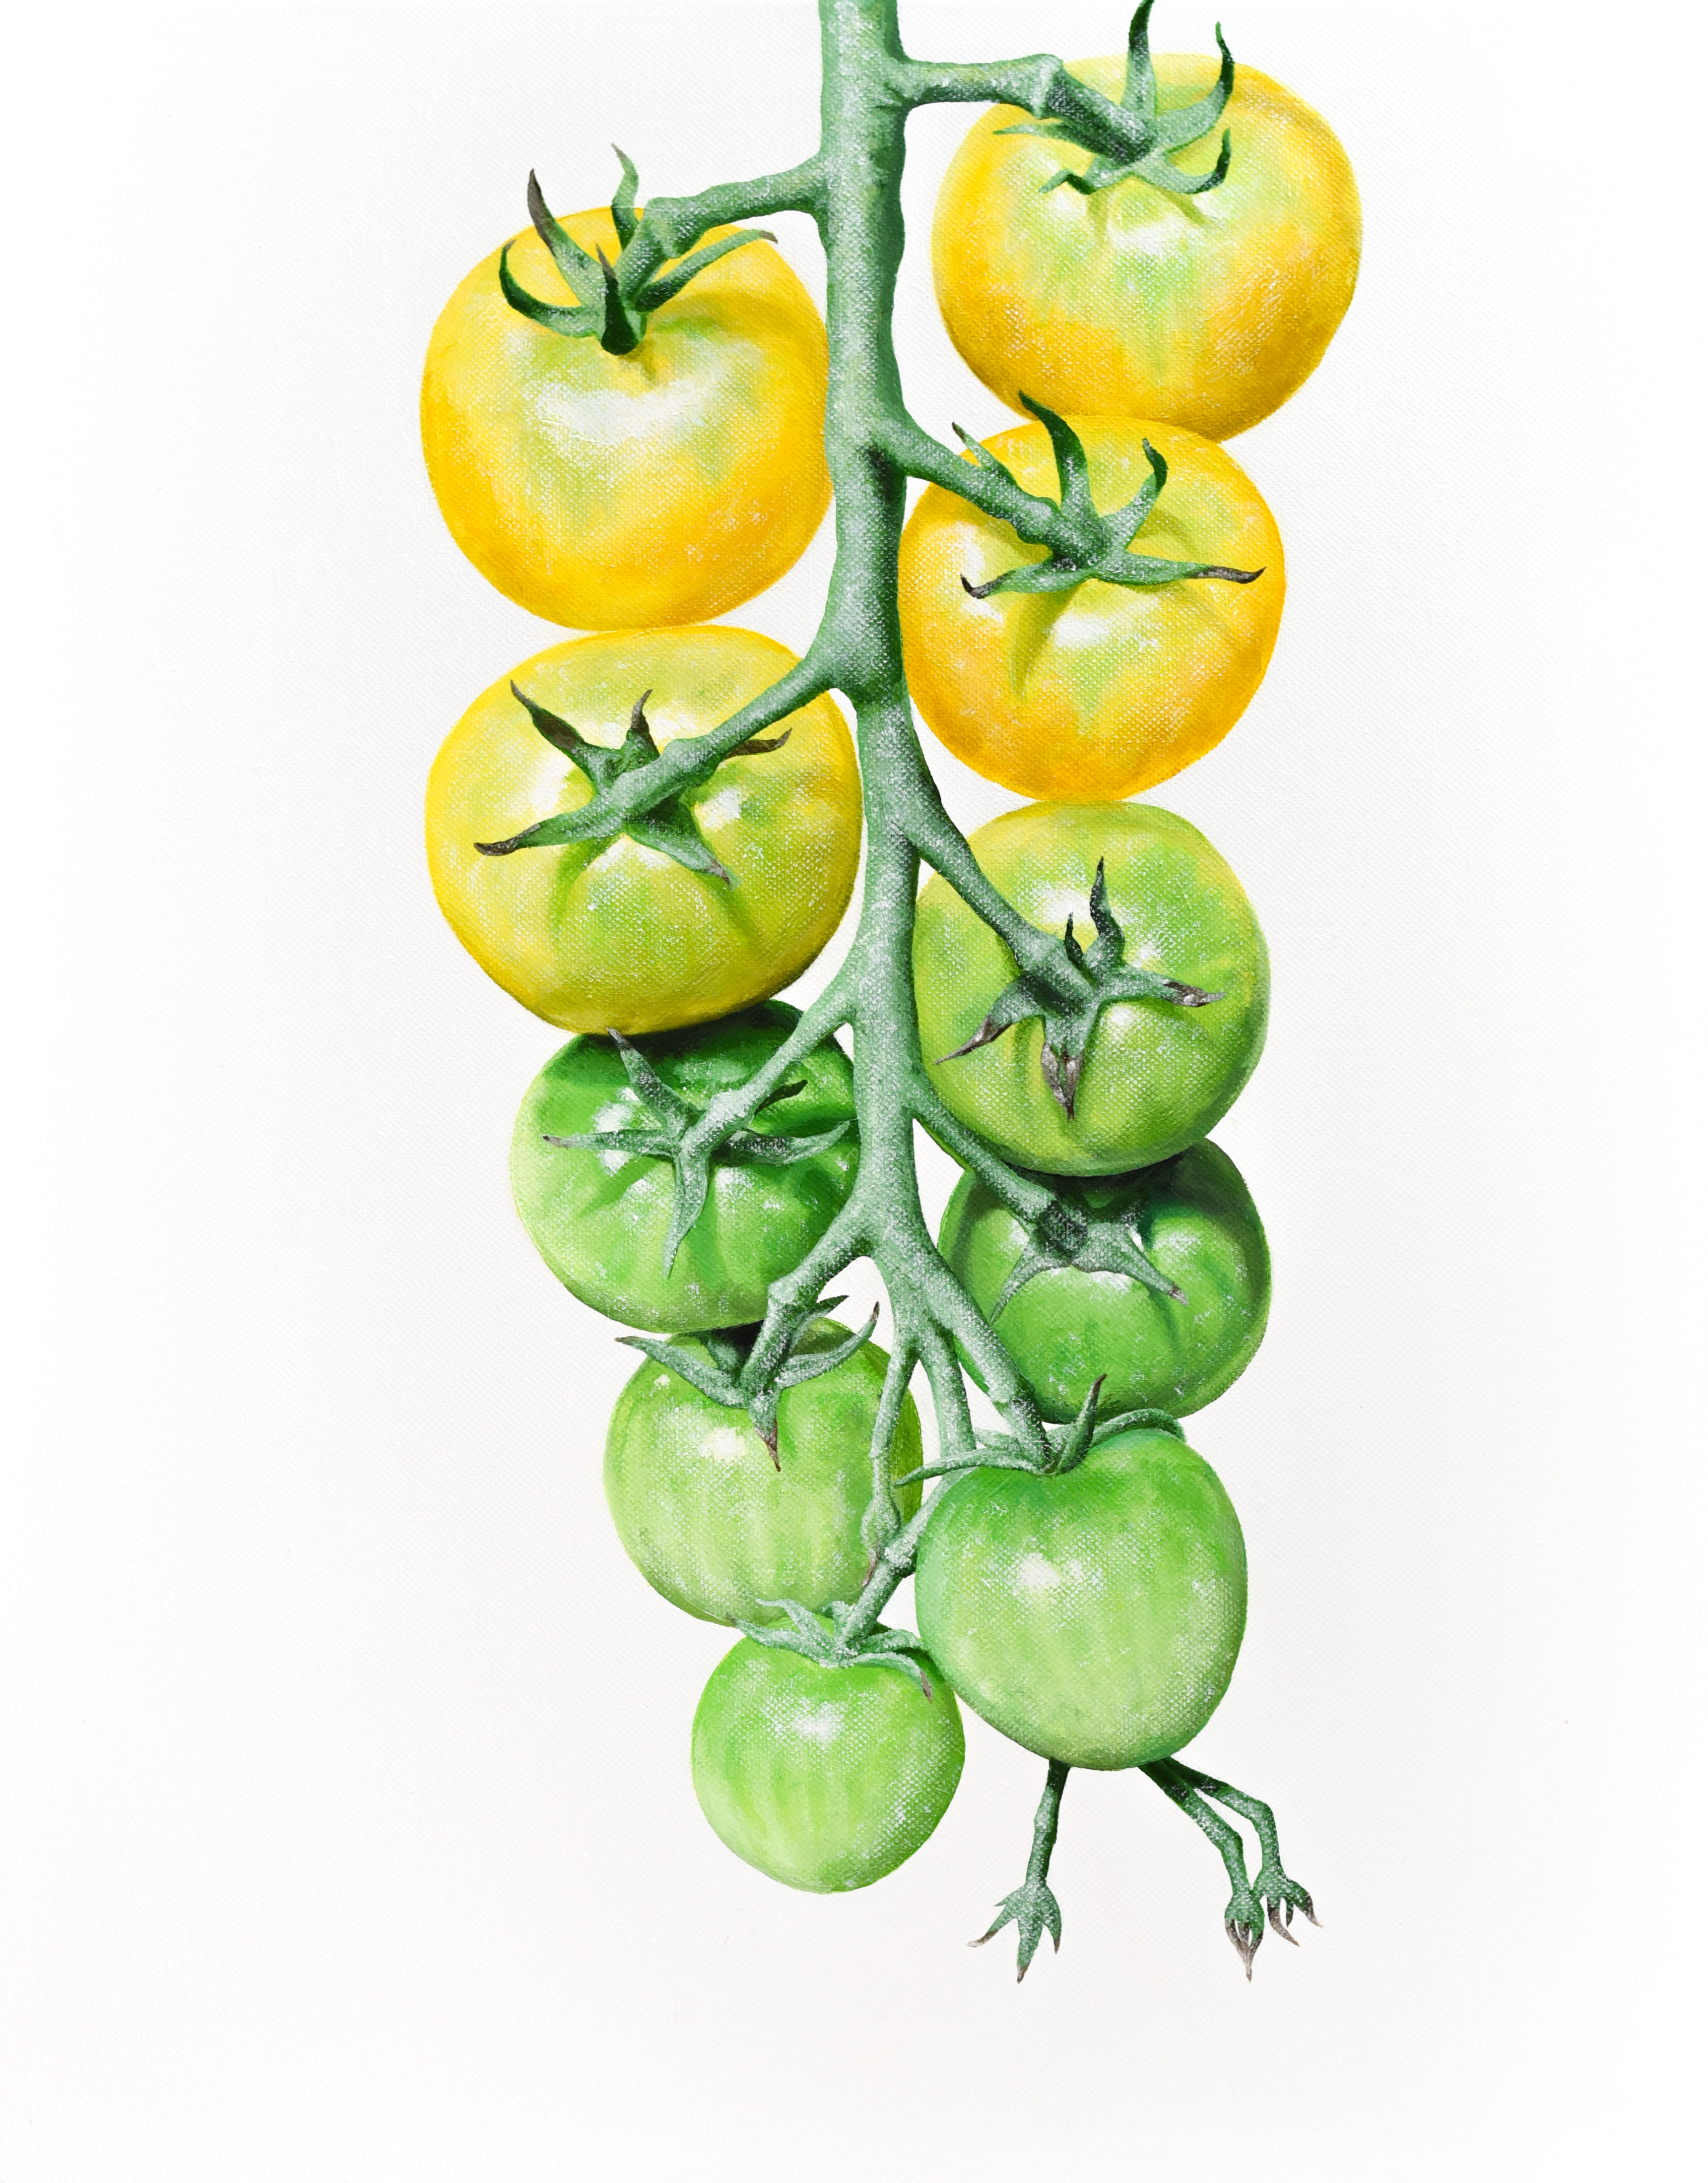 Sungold tomato painting by Kenan Hill